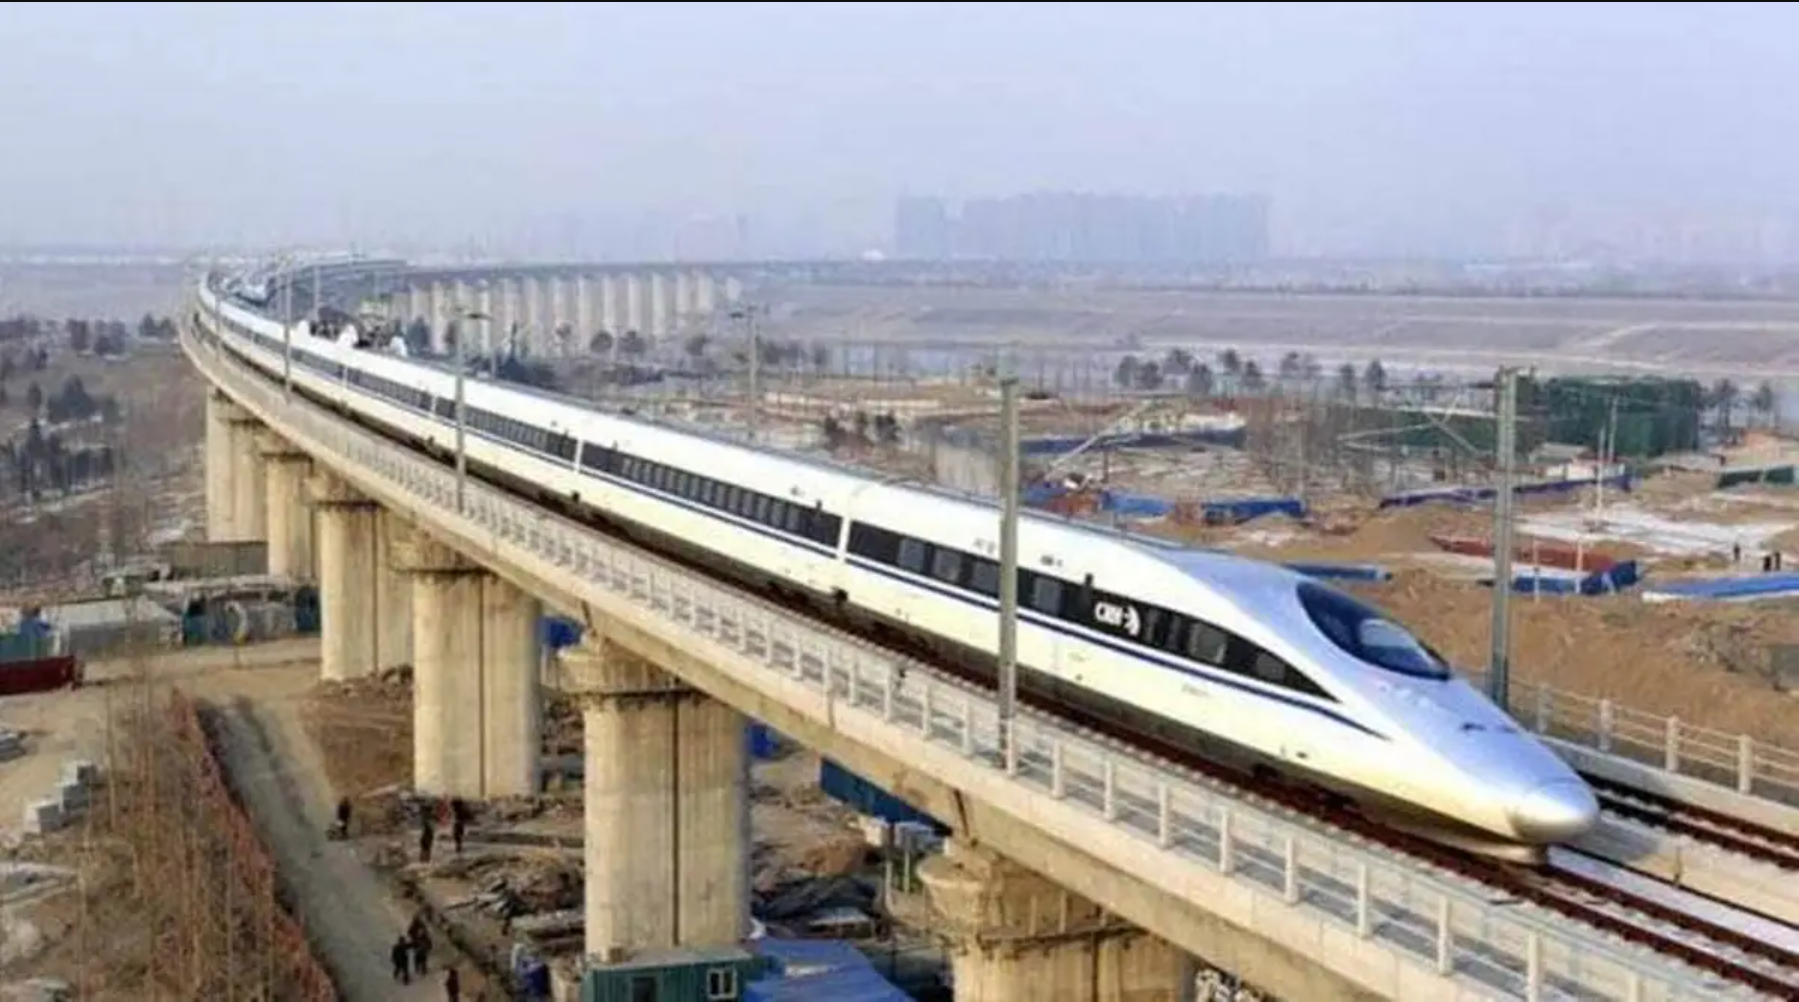 India’s First Bullet Train Project: Latest Updates and Features Revealed by Minister